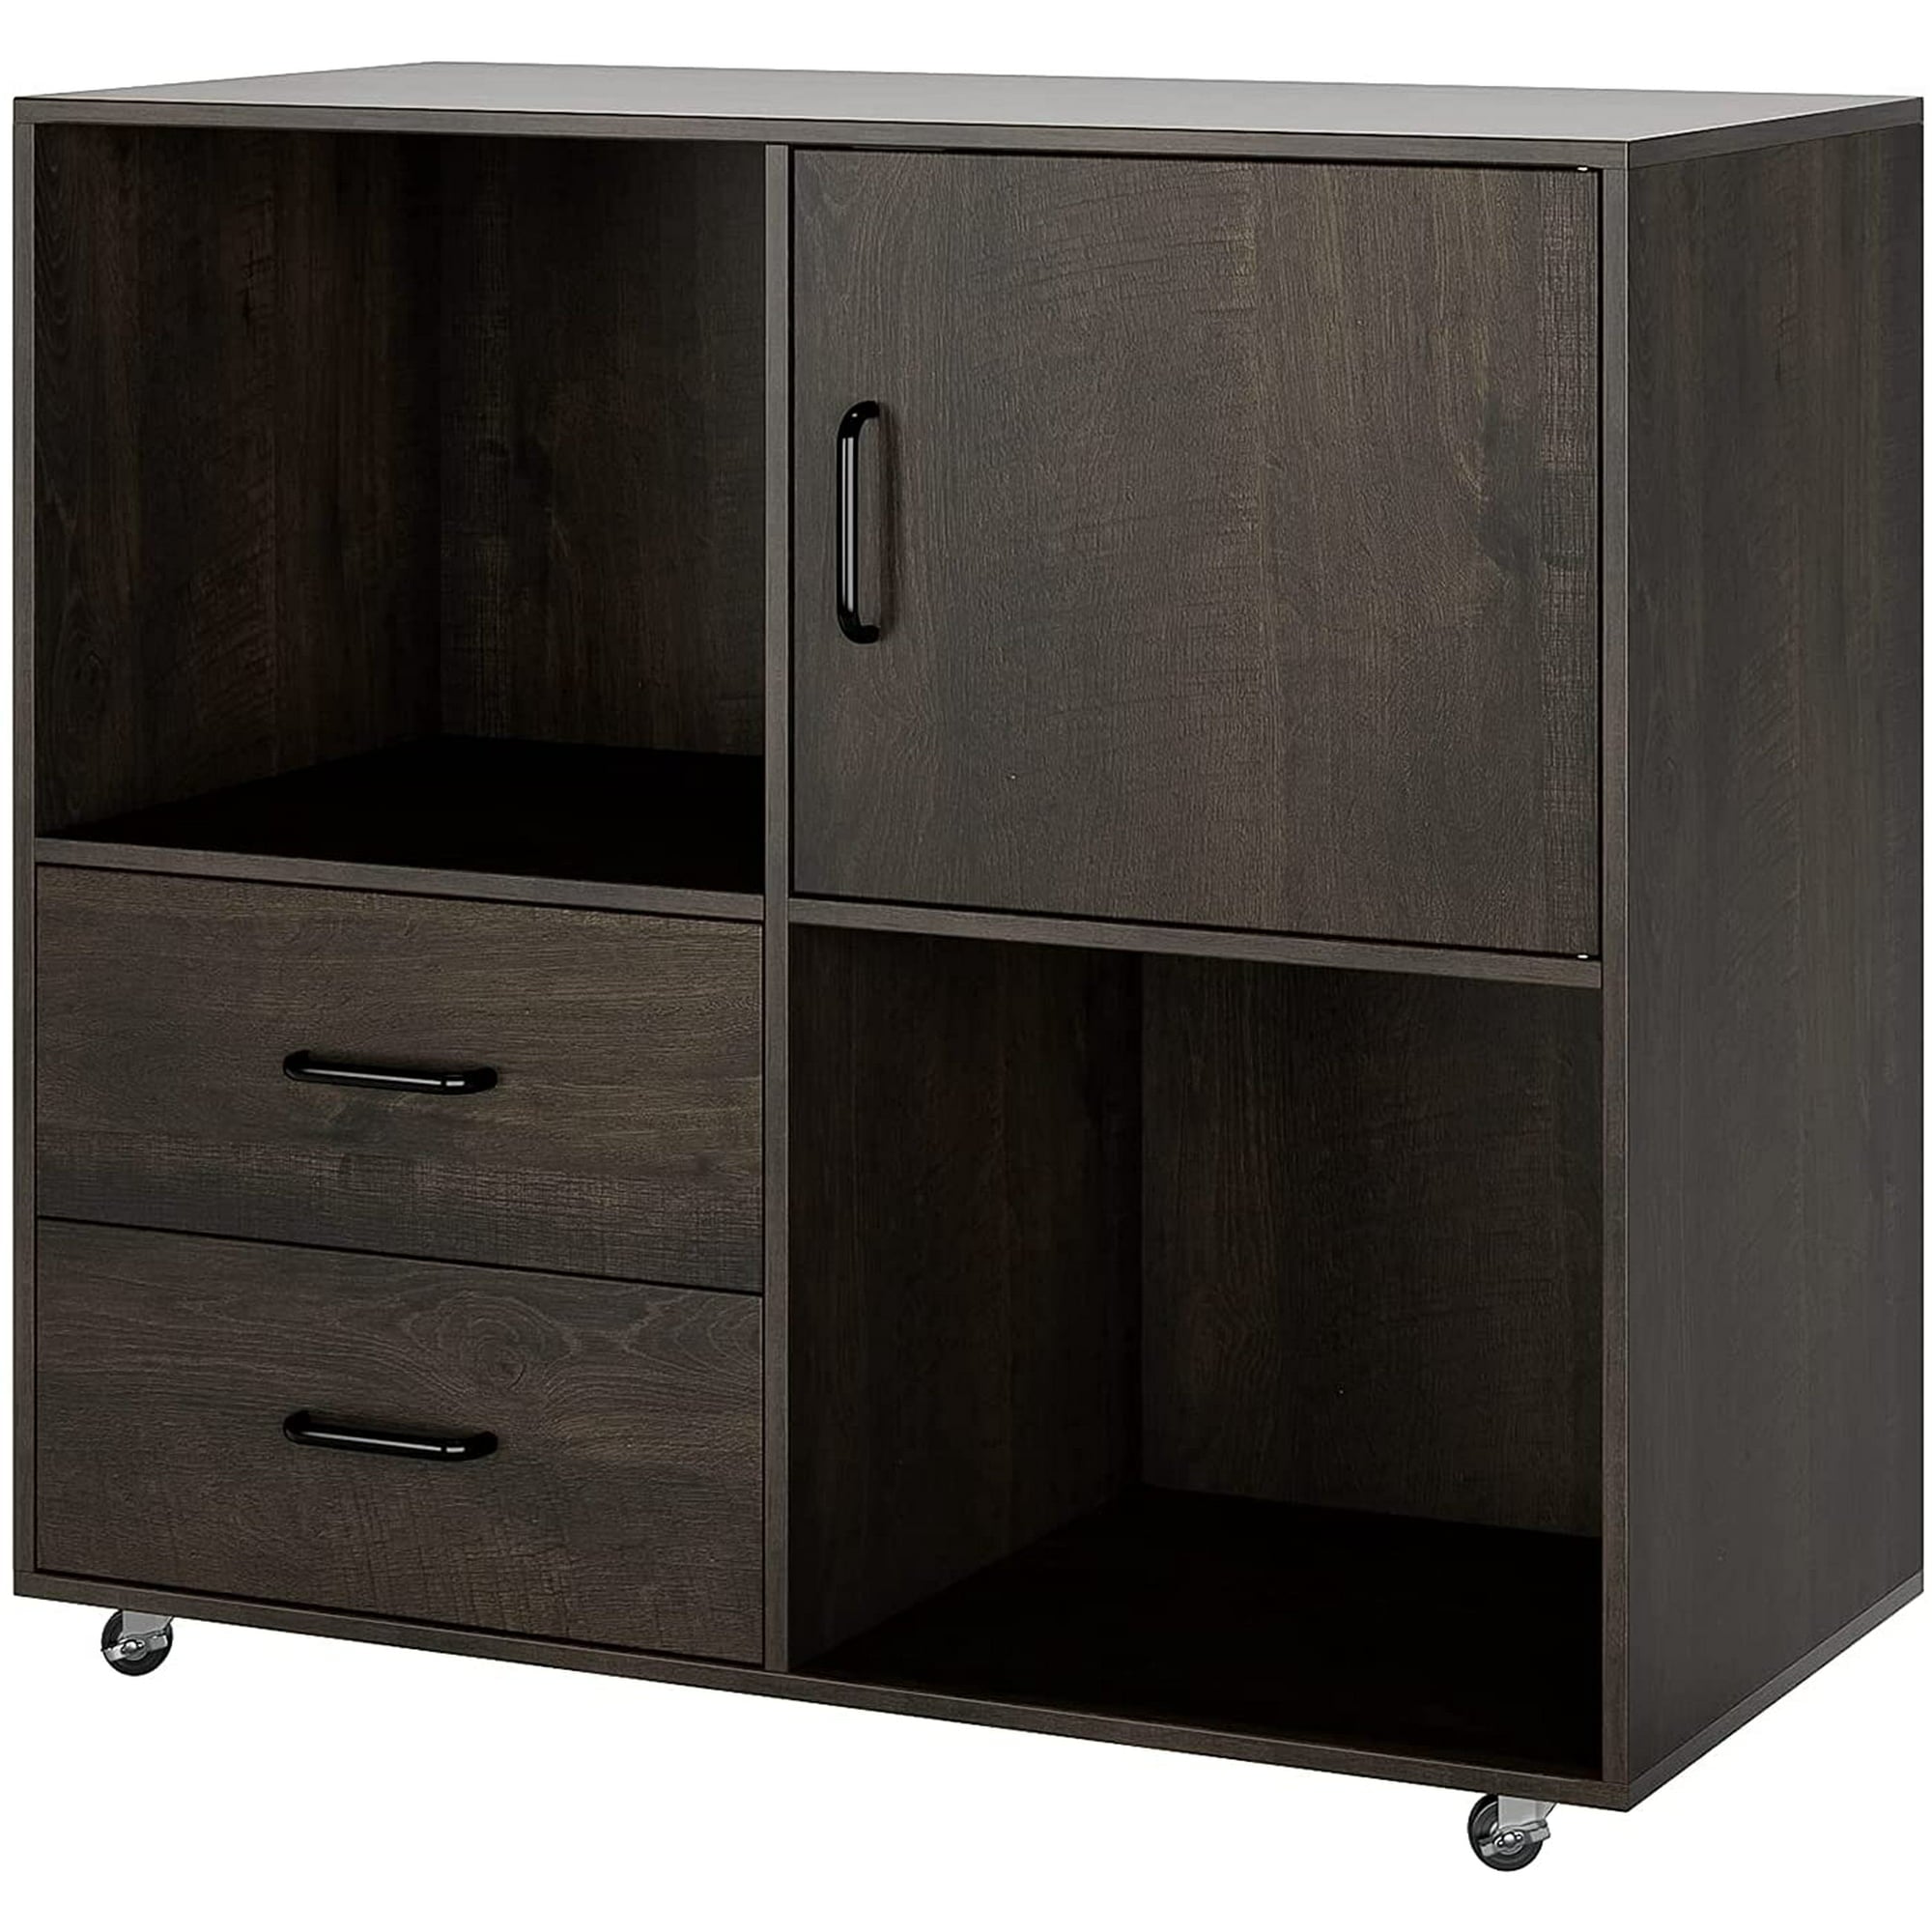 Filing Cabinet - Mobile Lateral Filing Cabinet with Wheels, Large Modern Printer Stand with 2 Drawers and Open Shelves, Functional Storage Cabinet for Home Office, Dark Brown